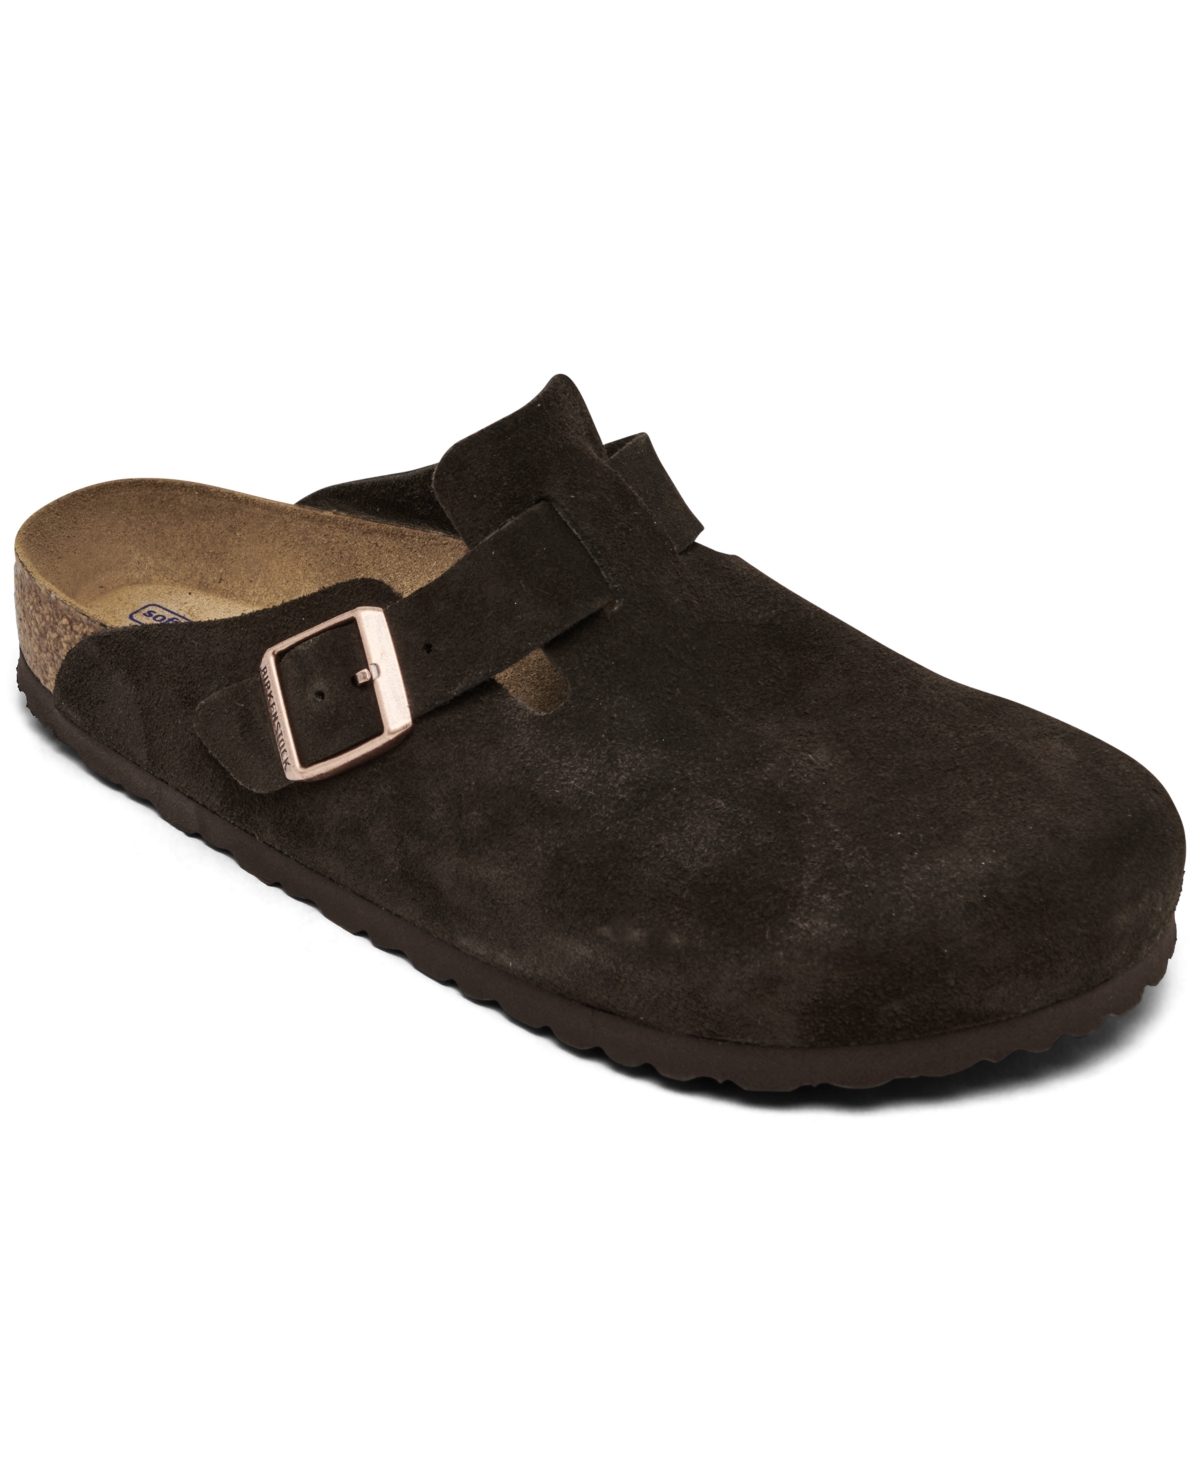 Men's Boston Soft Footbed Suede Leather Clogs from Finish Line - Black